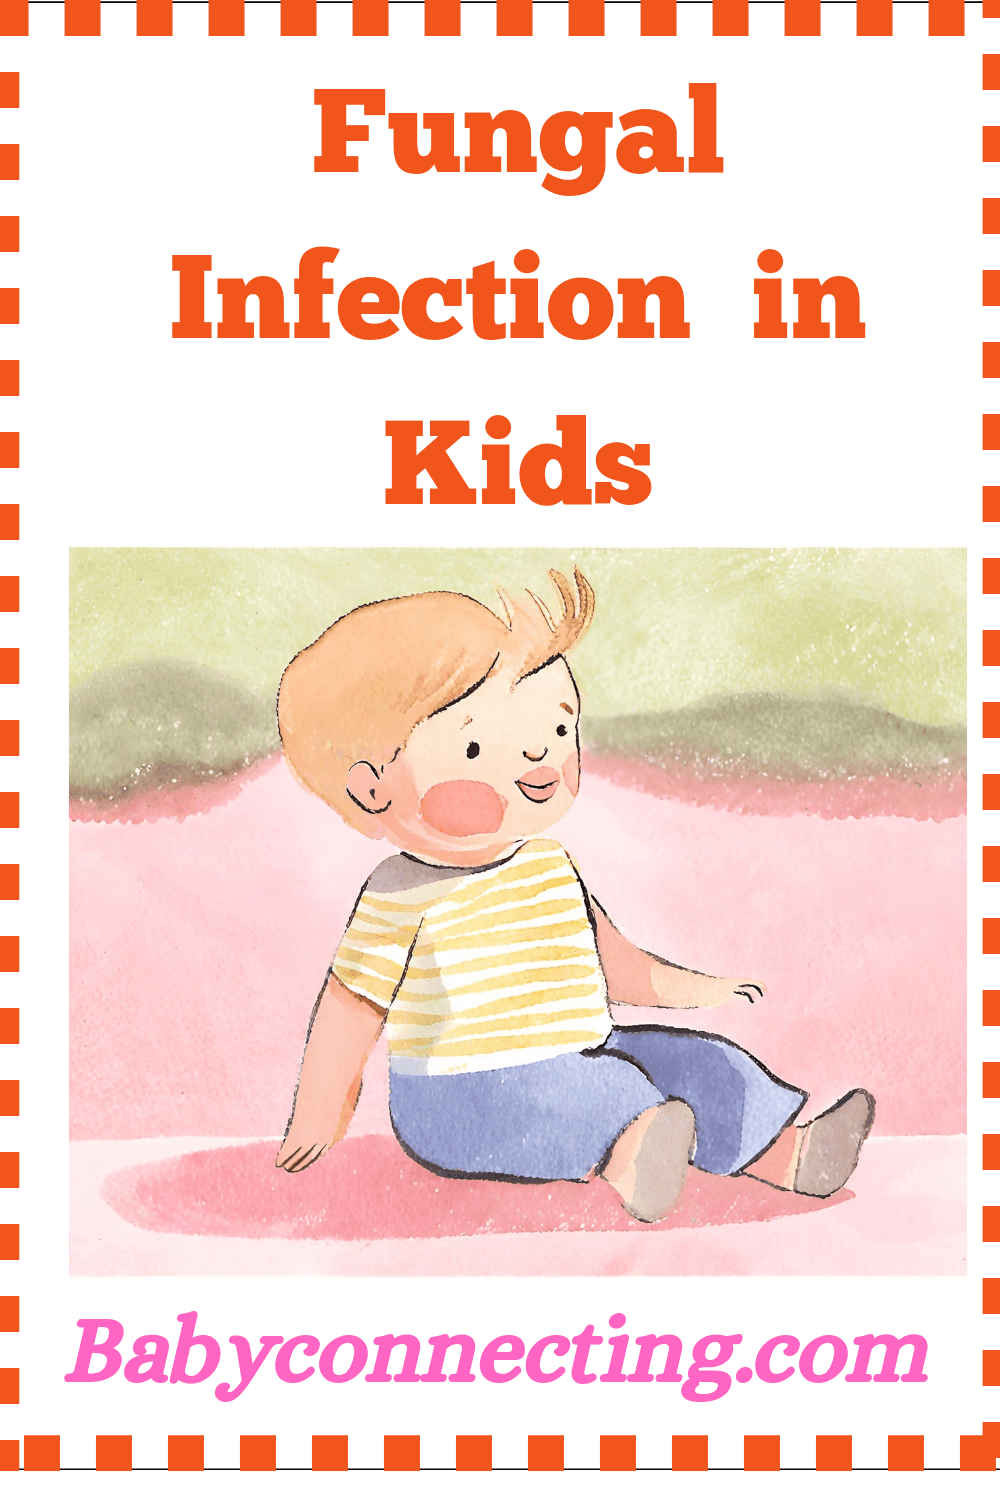 Fungal infection in kids